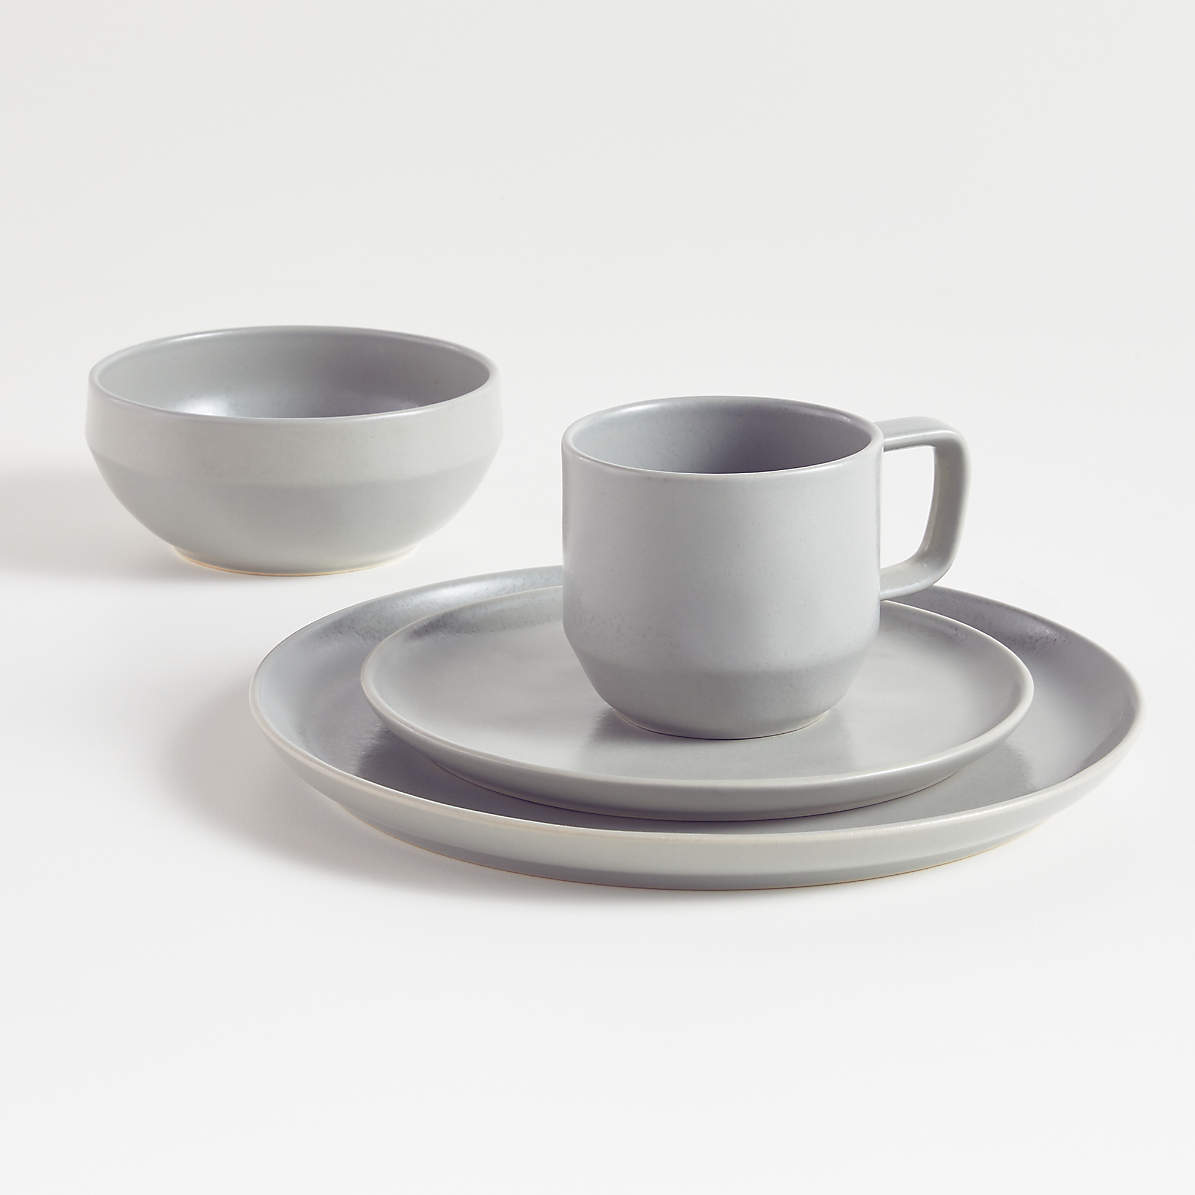 Unique Stoneware Wet or Dry Measuring Cups Set of 4 Gray Grey and White  Vintage Style